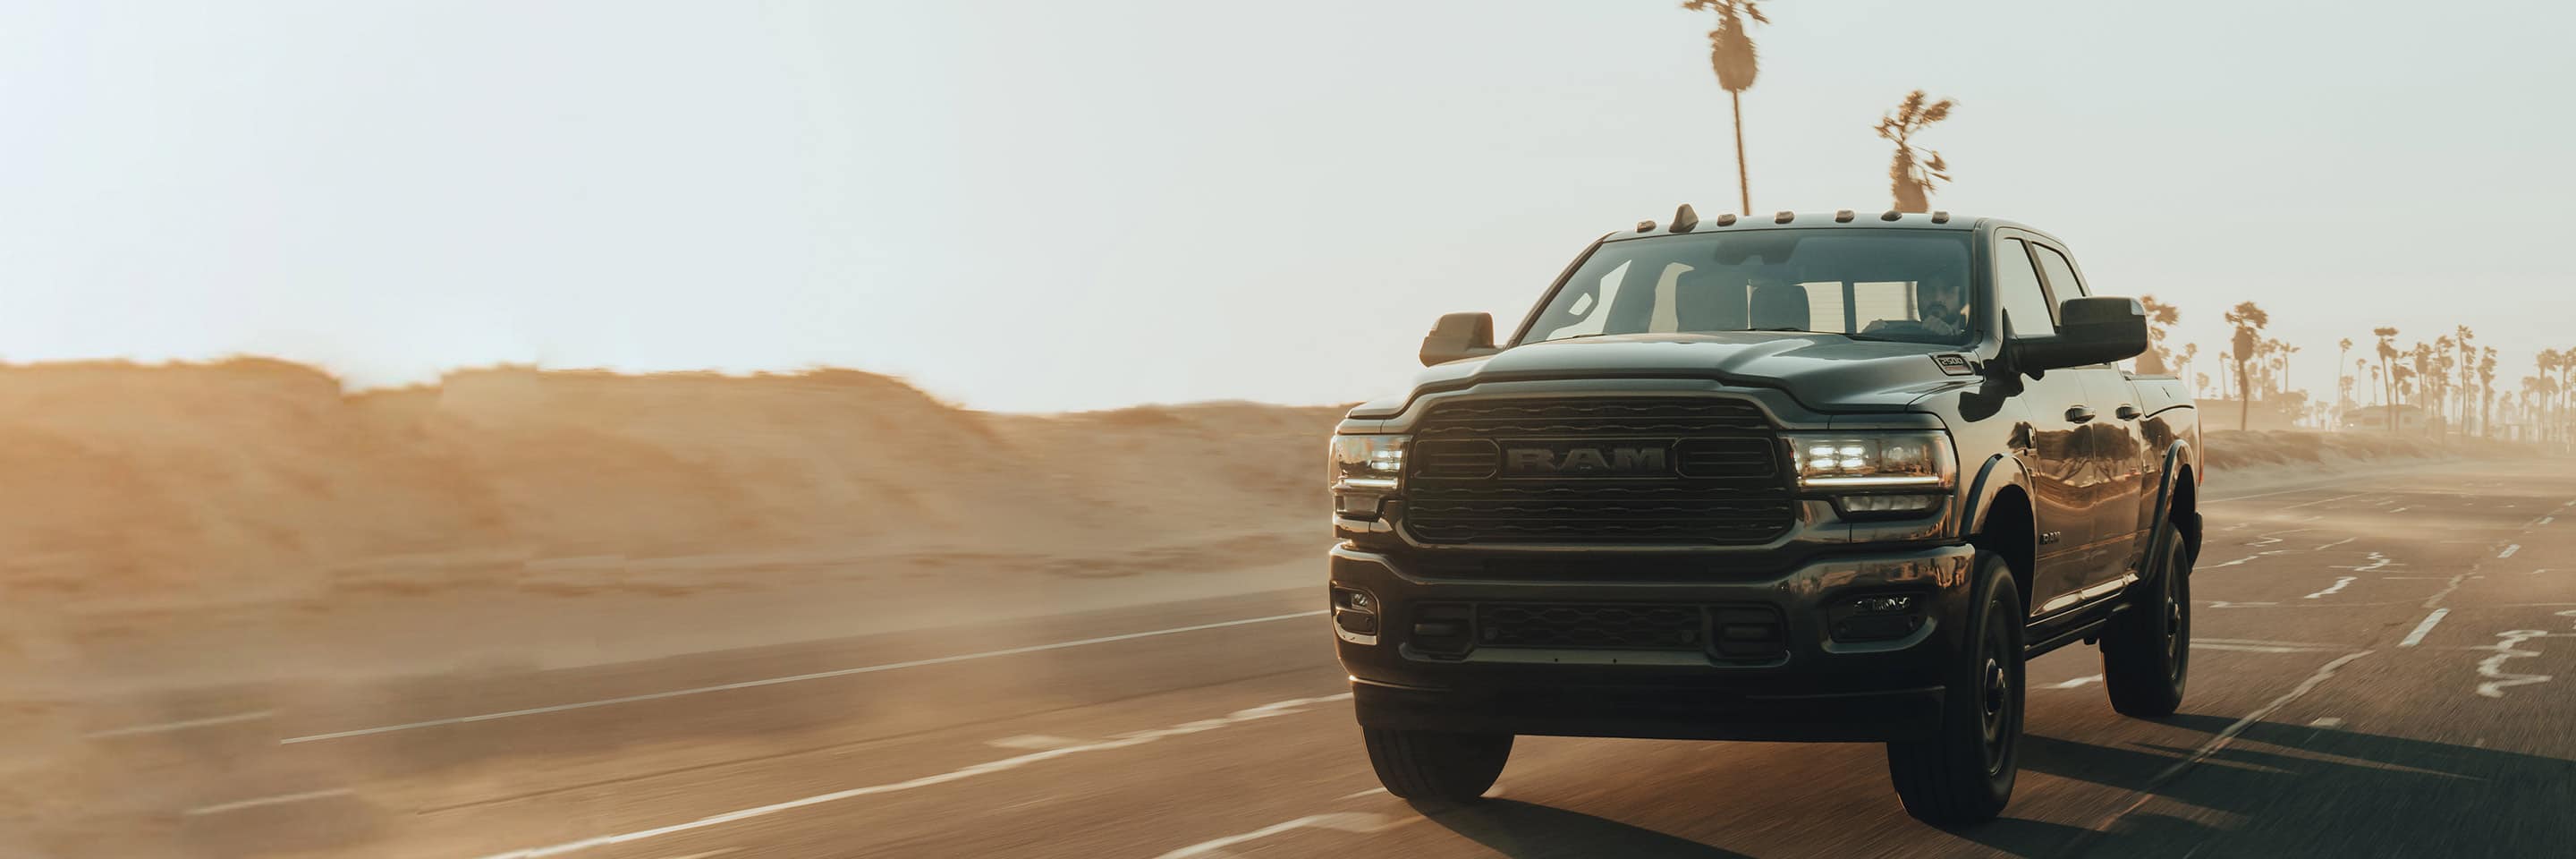 The 2022 Ram 2500 being driven on a dusty road lined with palm trees.